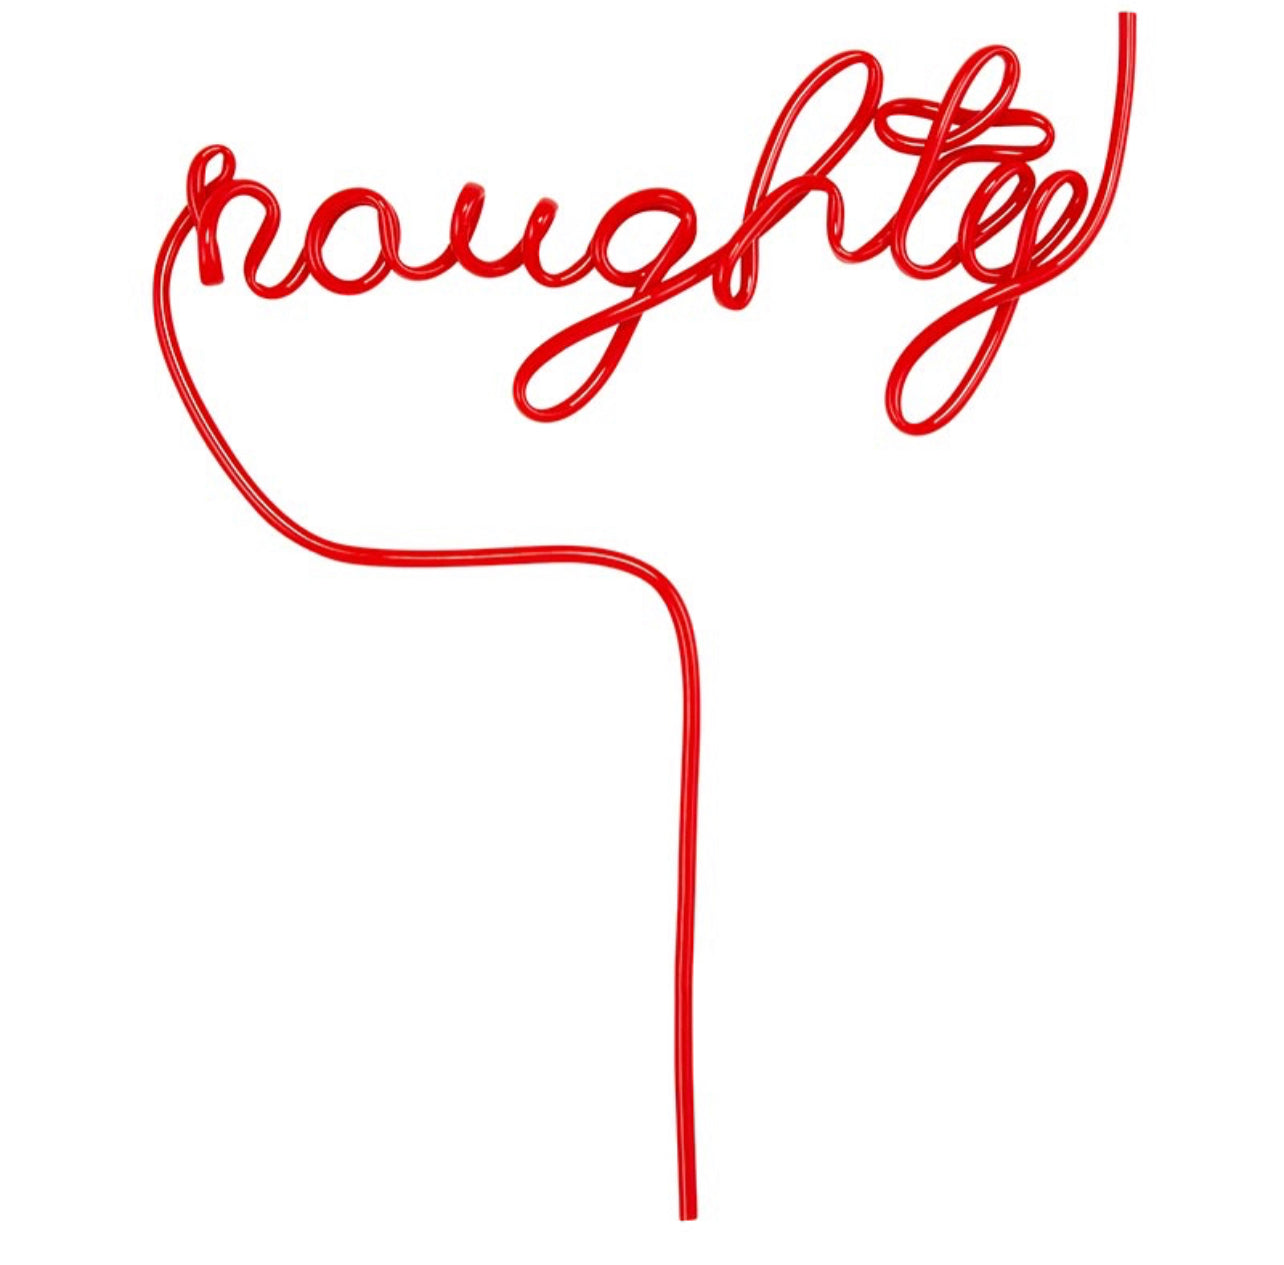 red christmas straw for drinks that spells out the word "naughty"